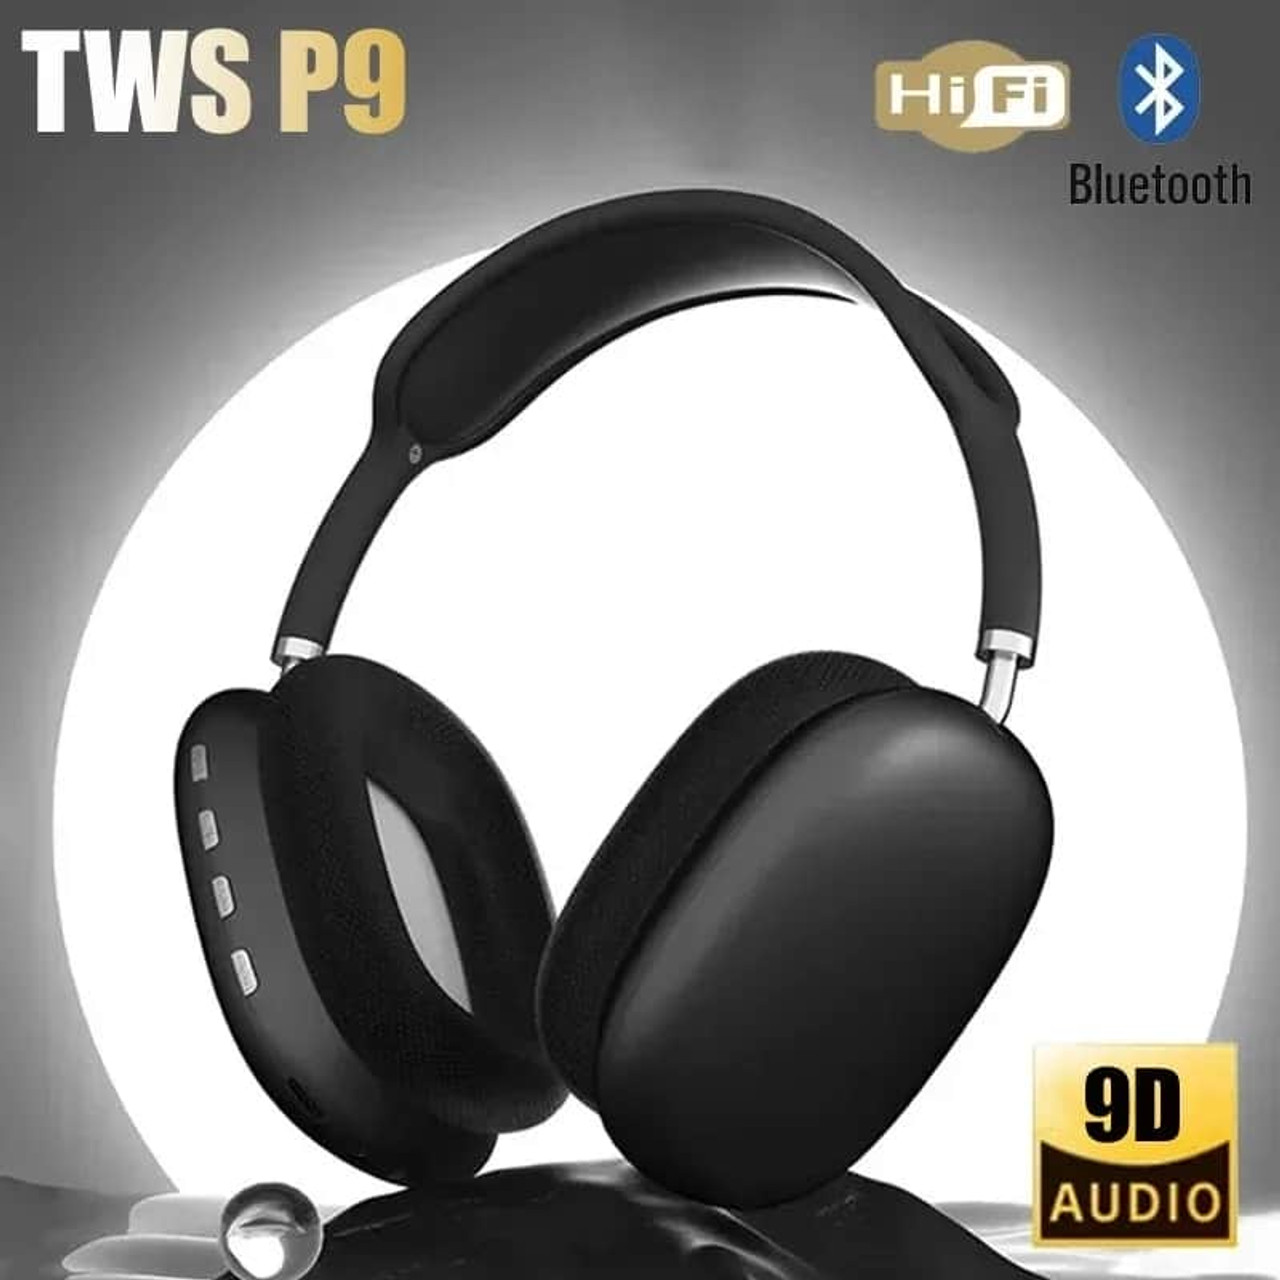 TWS P9 Wireless Bluetooth Headphones with Mic Noise Cancelling Headsets iPhone Android IOS